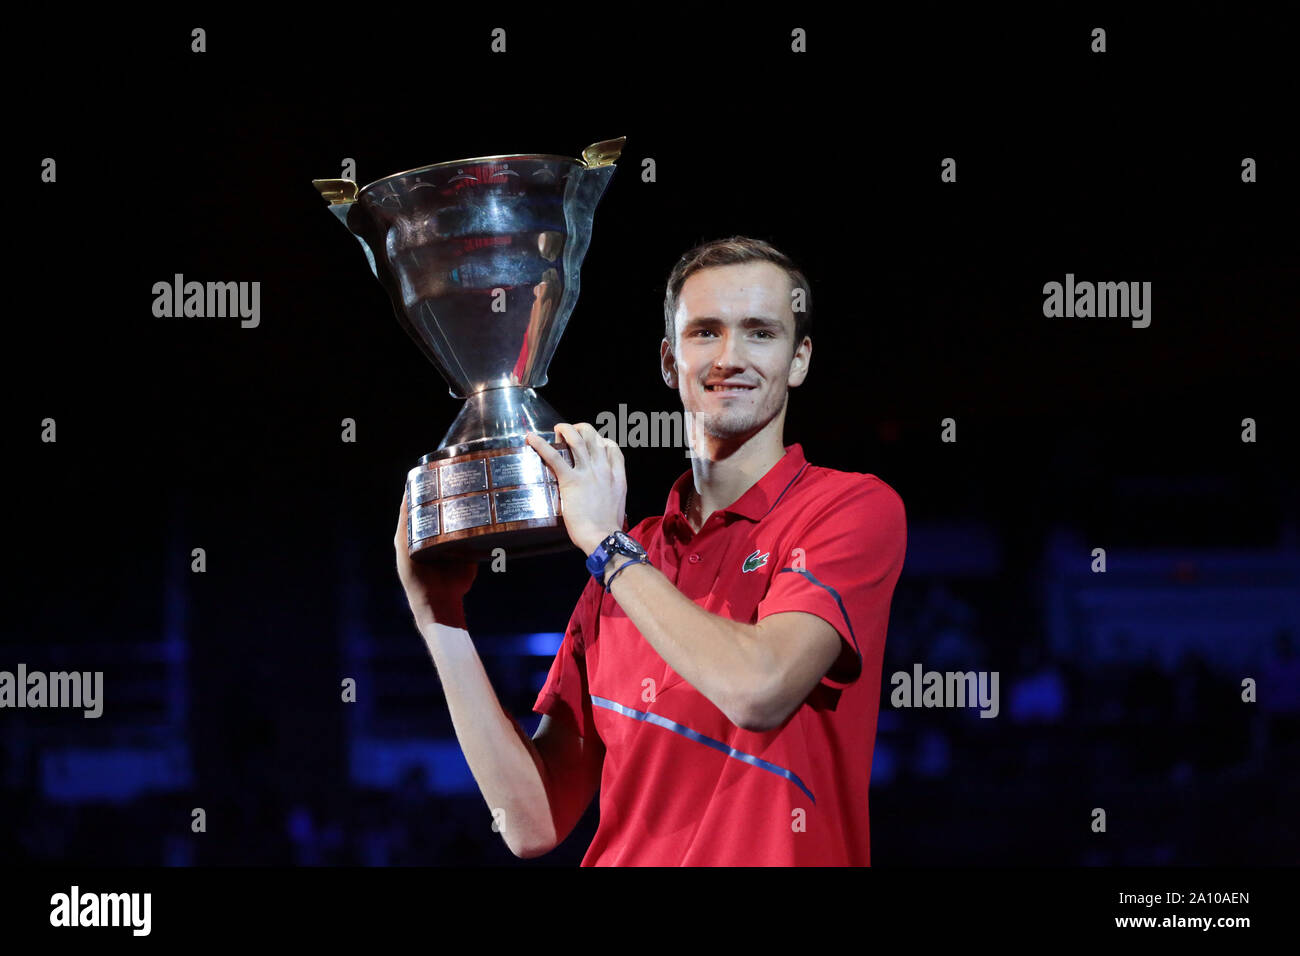 St. Petersburg, Russia. 22nd Sep, 2019. Daniil Medvedev of Russia poses with the trophy during the awarding ceremony after the final match against Borna Coric of Croatia at St. Petersburg Open ATP tennis tour in St. Petersburg, Russia, Sept. 22, 2019. Credit: Irina Motina/Xinhua/Alamy Live News Stock Photo